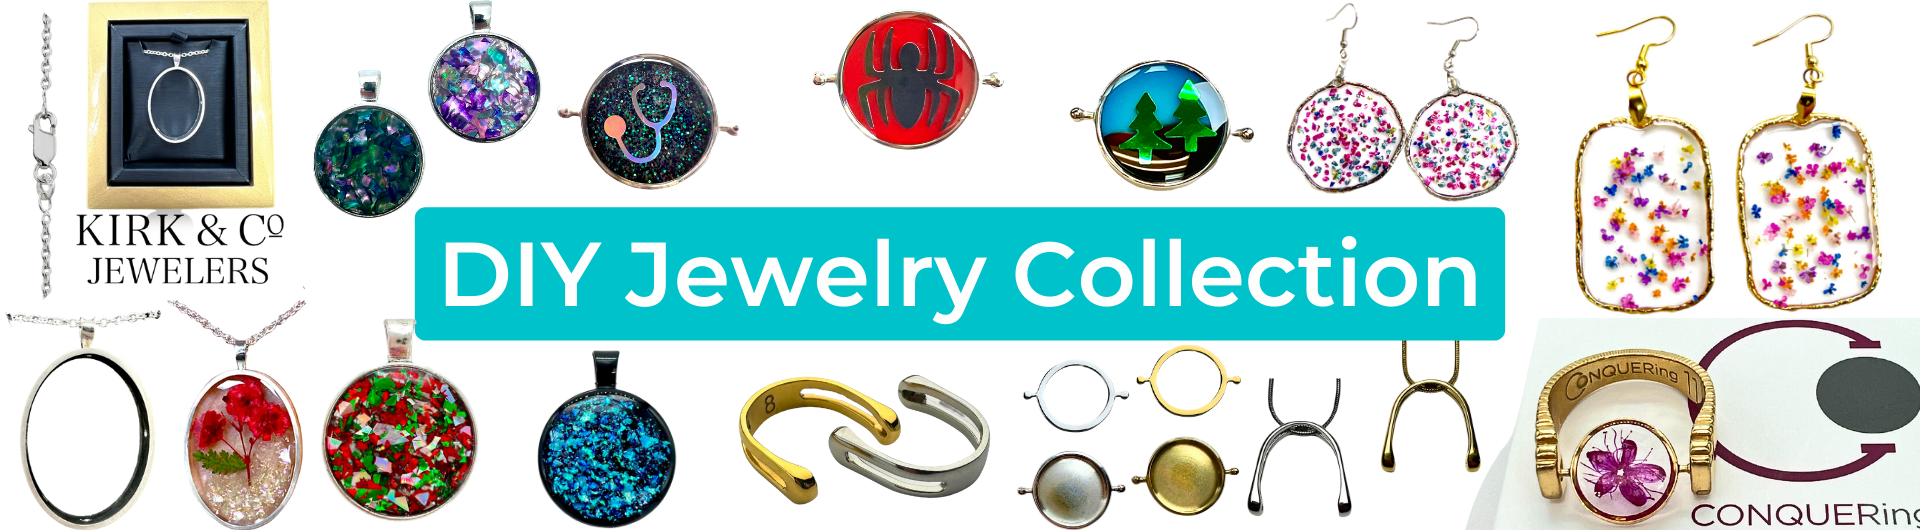 DIY Jewelry Collection